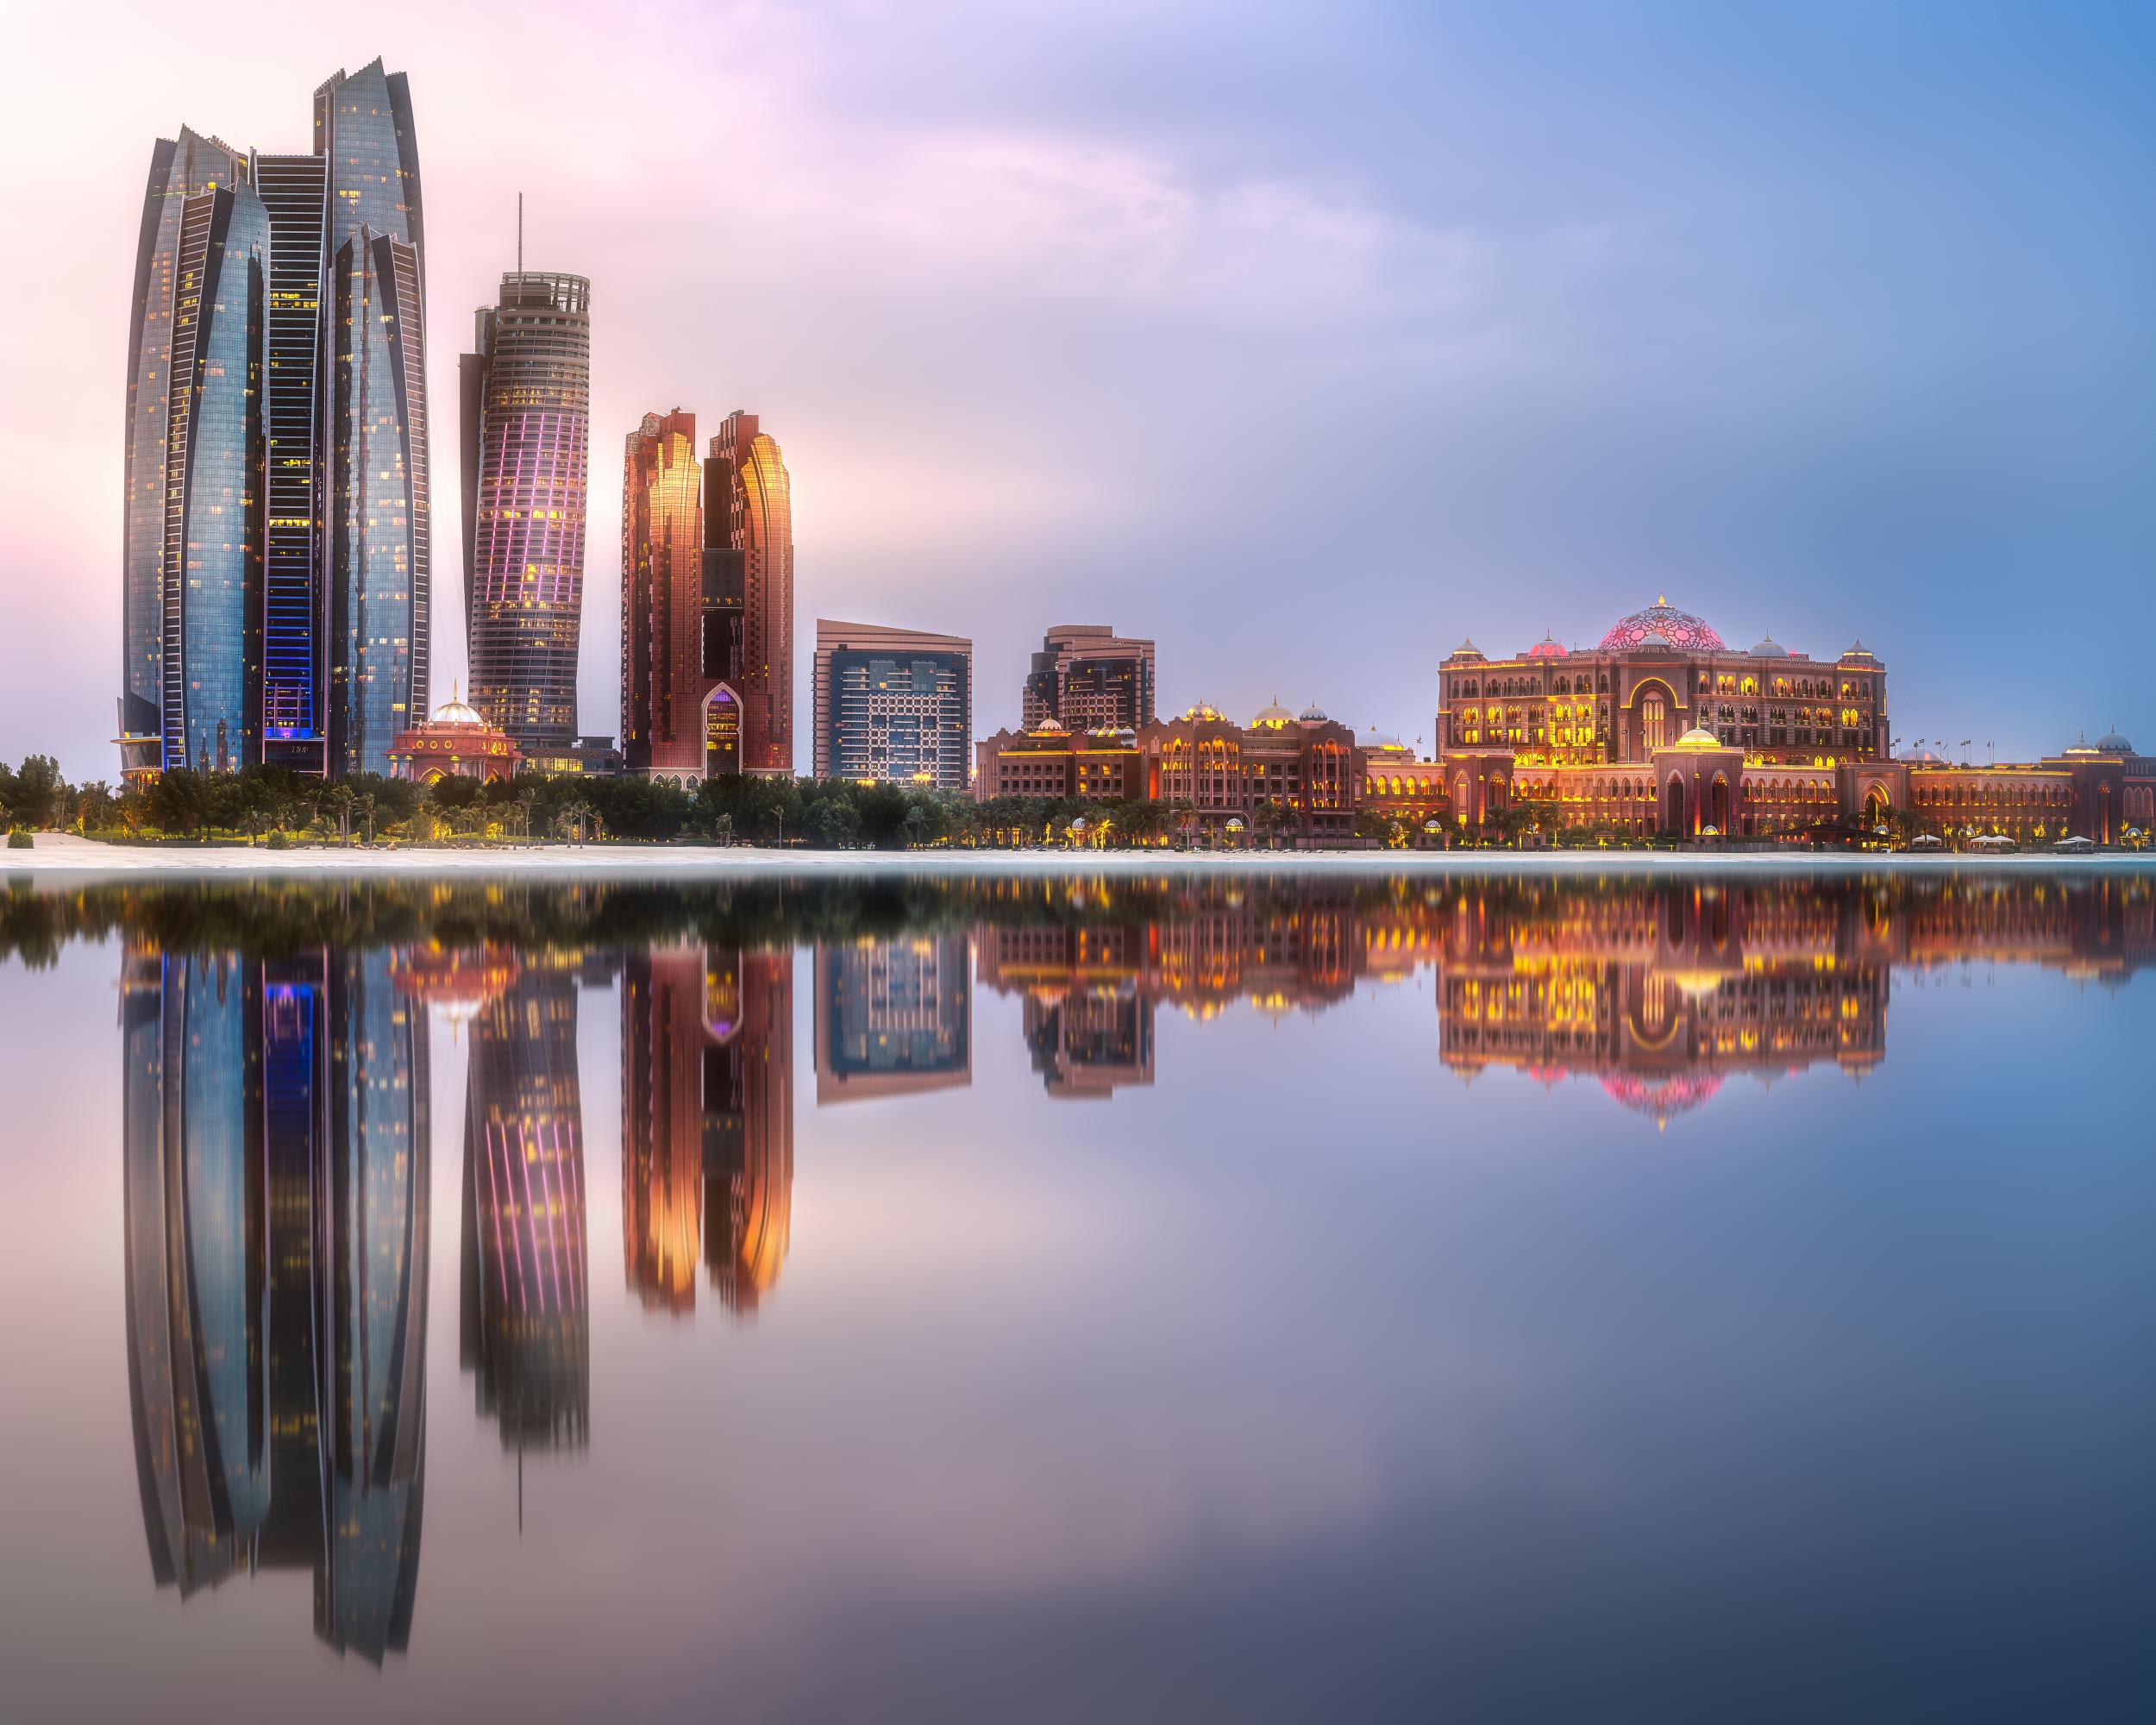 Abu Dhabi city guide: Where to eat, drink, shop and stay in the